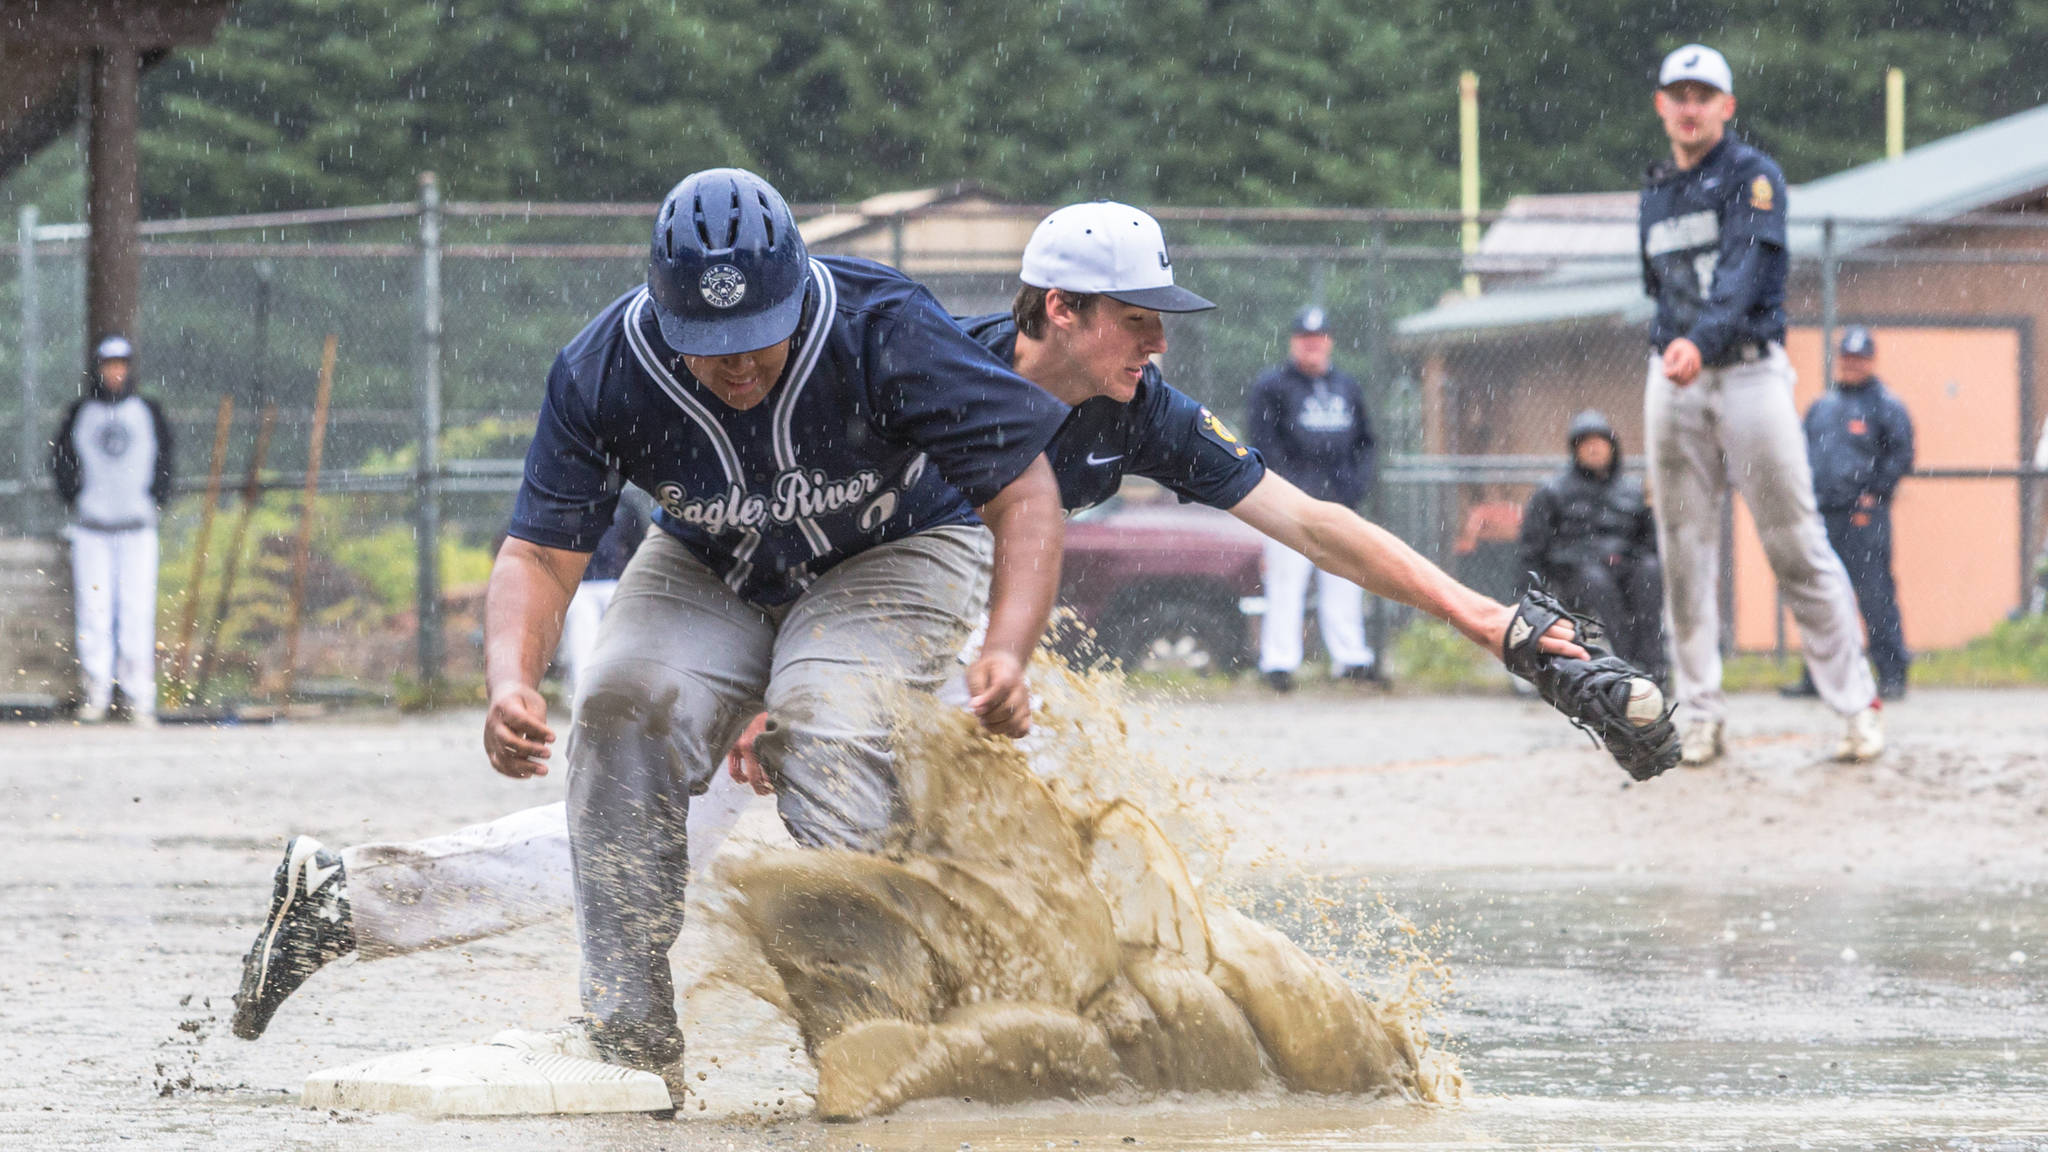 Juneau Post 25 first baseman Olin Rawson and Eagle River’s Orazio Ramos in Juneau’s final home game of the season on Sunday, July 15, 2018, at Adair-Kennedy Memorial Park. (Courtesy Photo | Heather Holt)